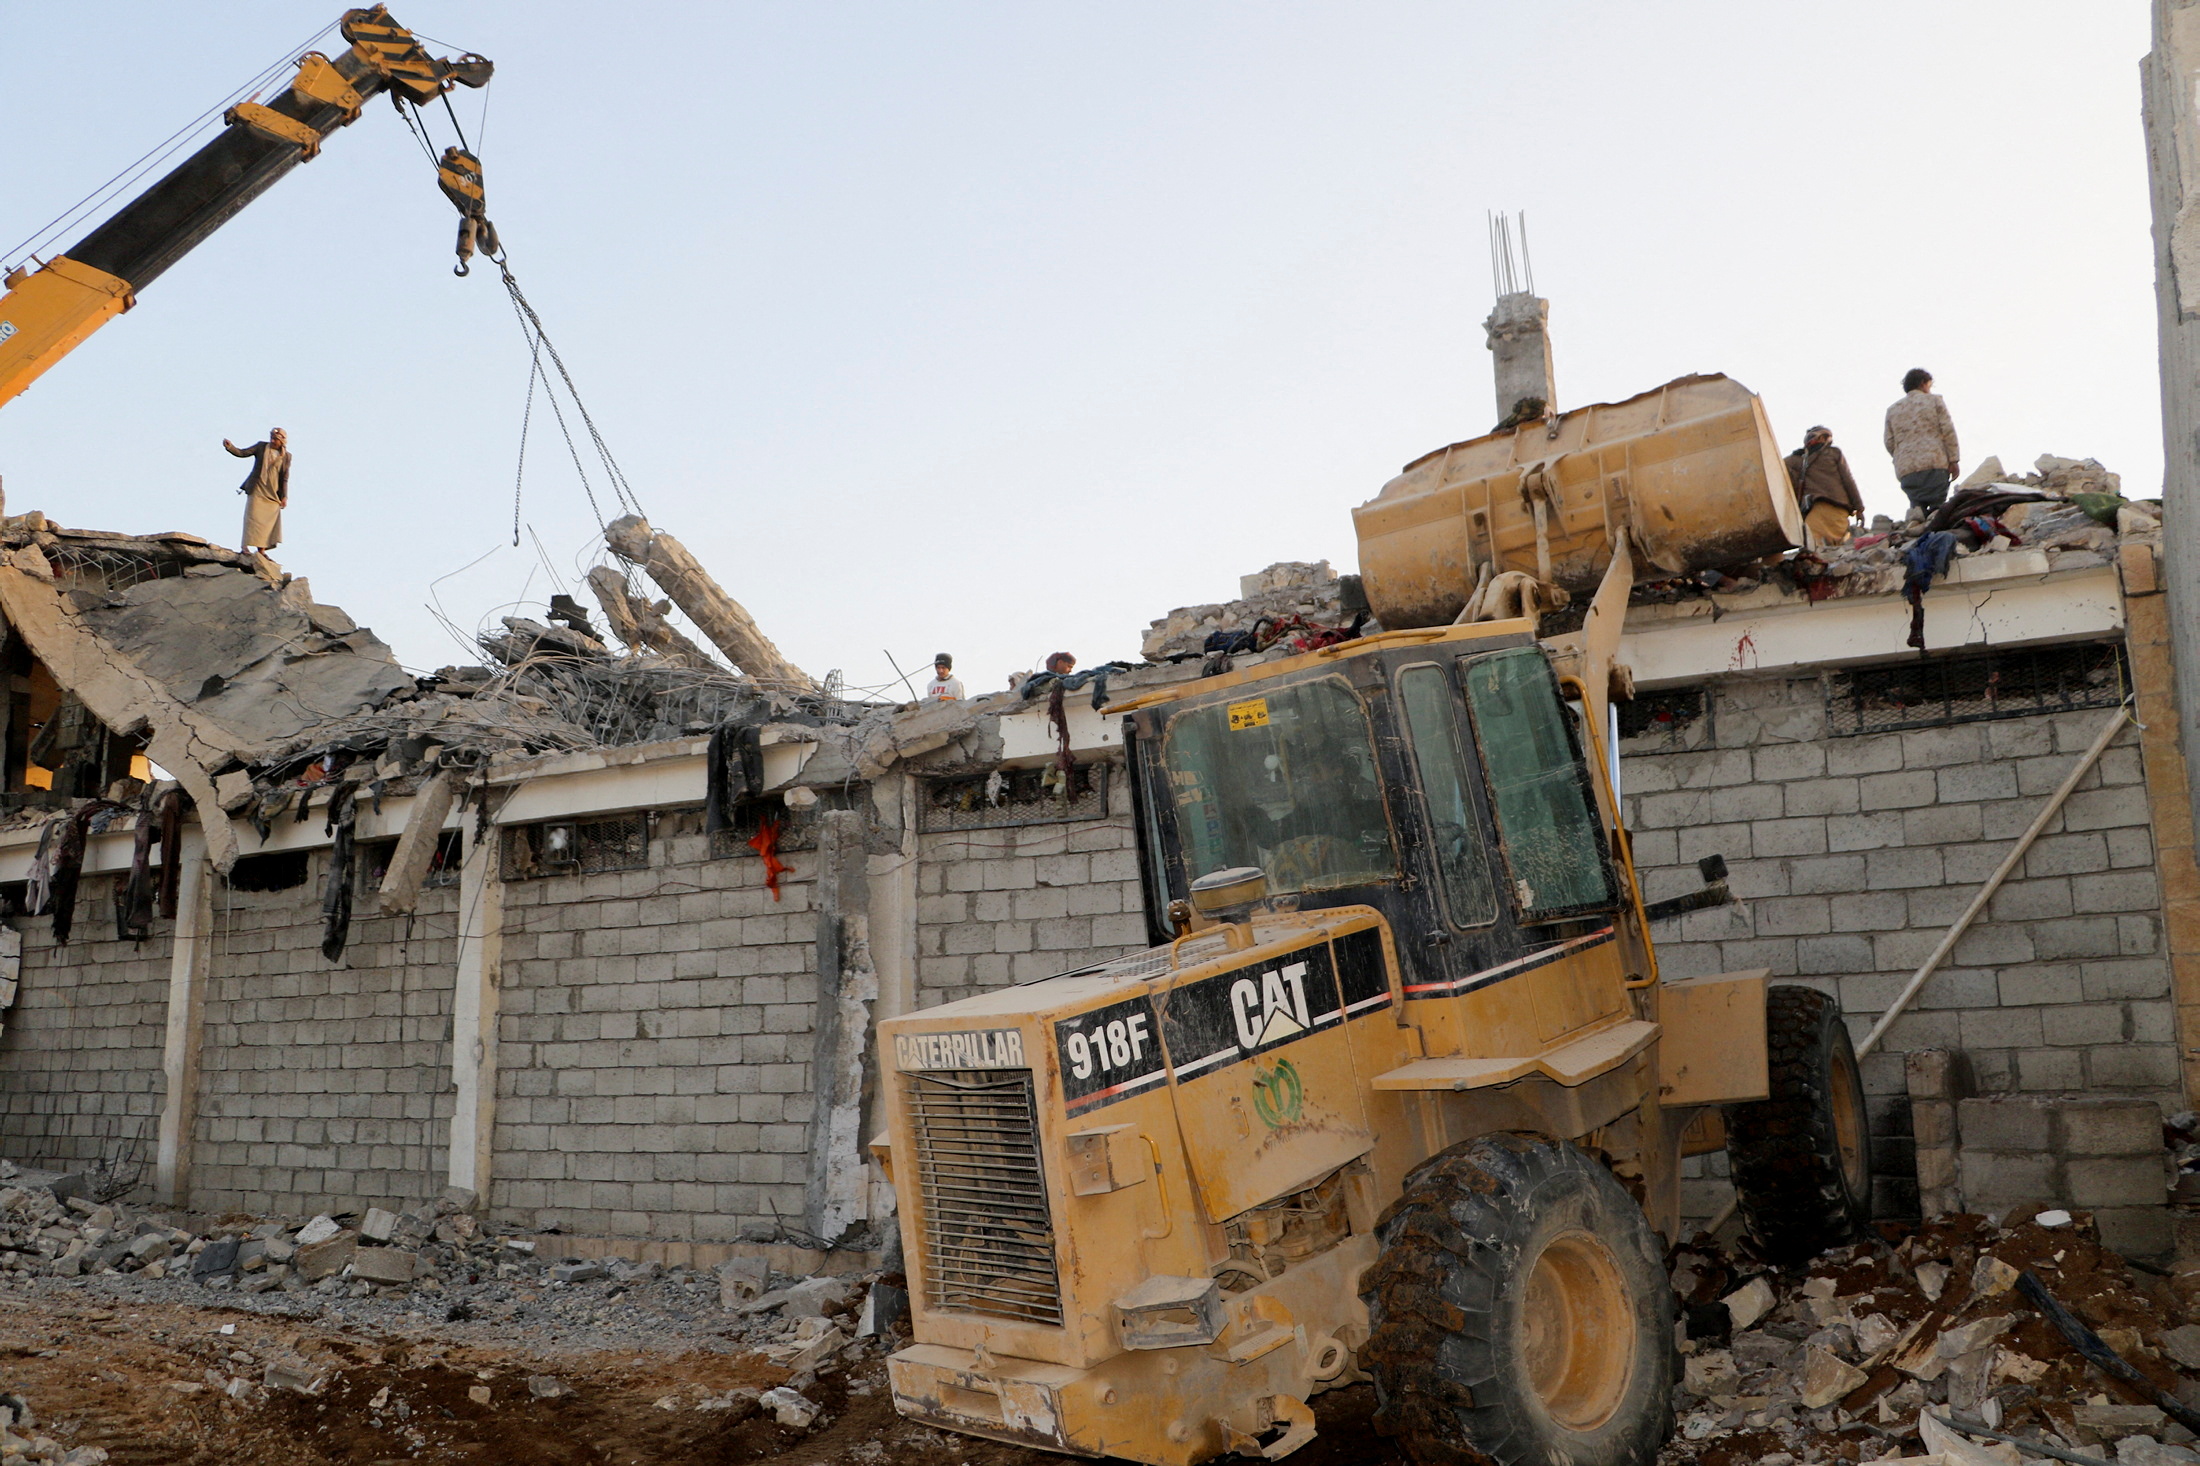 Rescuers use a bulldozer and a crane as they search for survivors at detention center hit by air strikes, in Saada